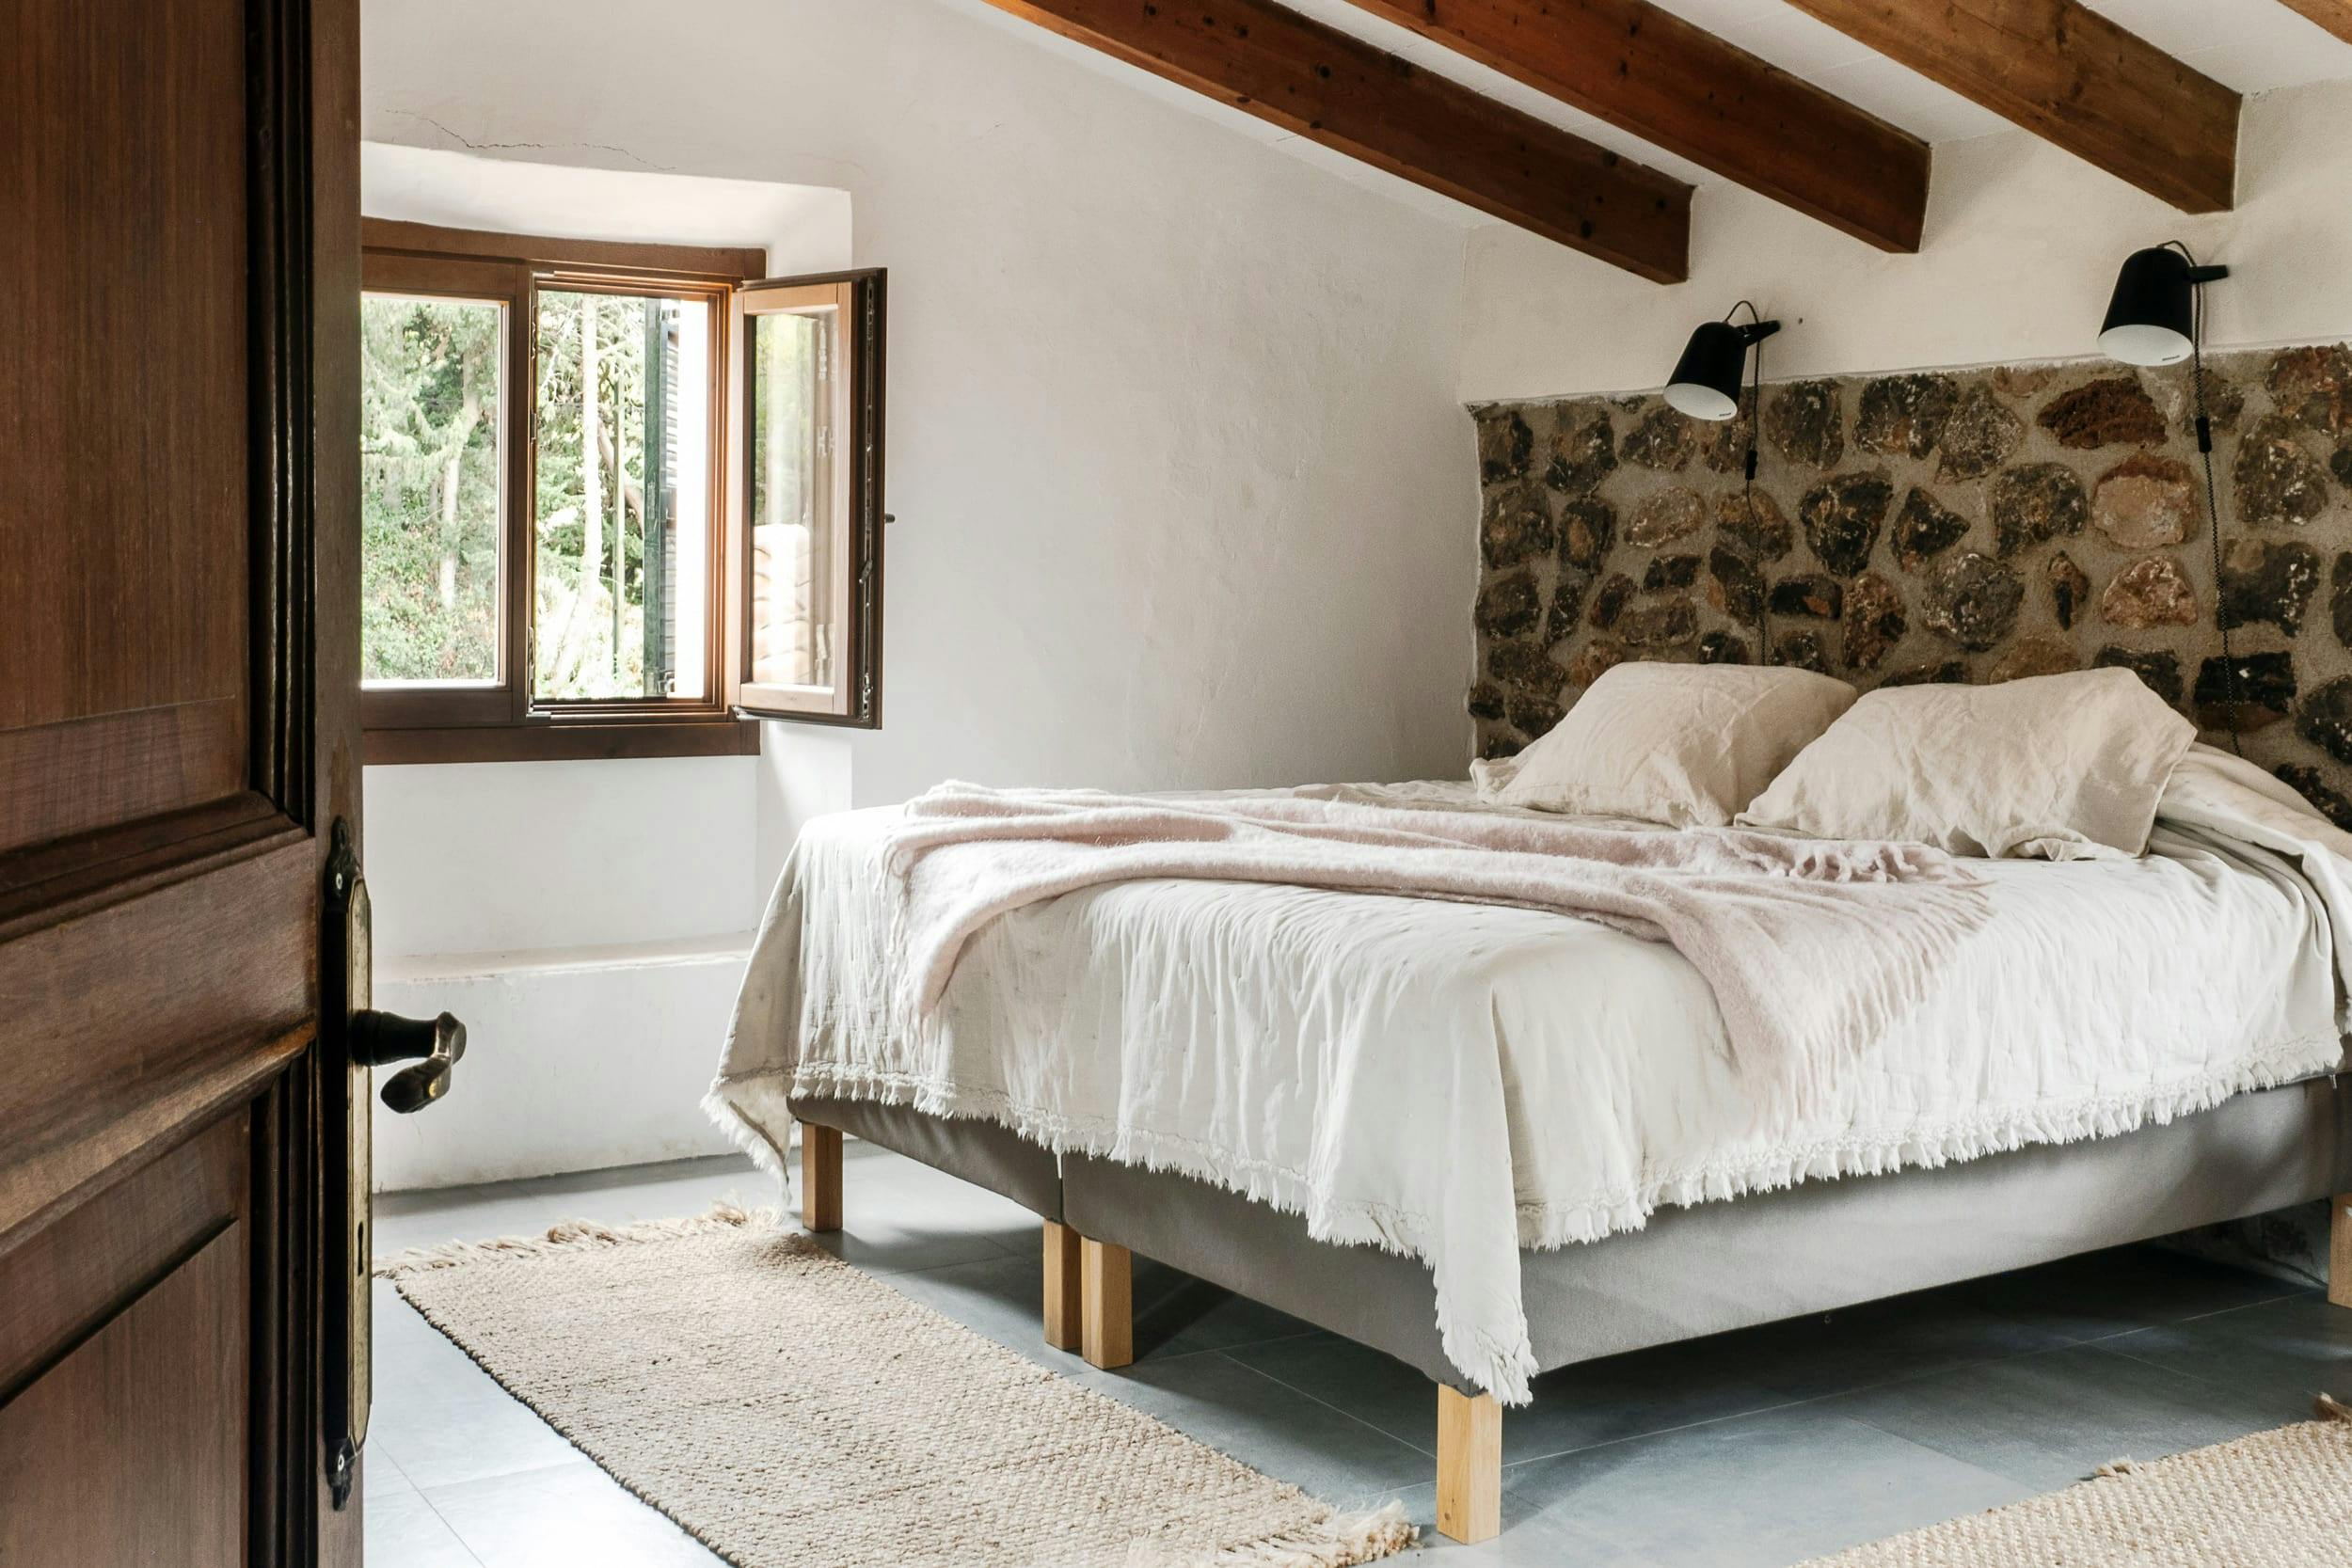 The image features a large bedroom with a neatly made bed, a wooden headboard, and a window.